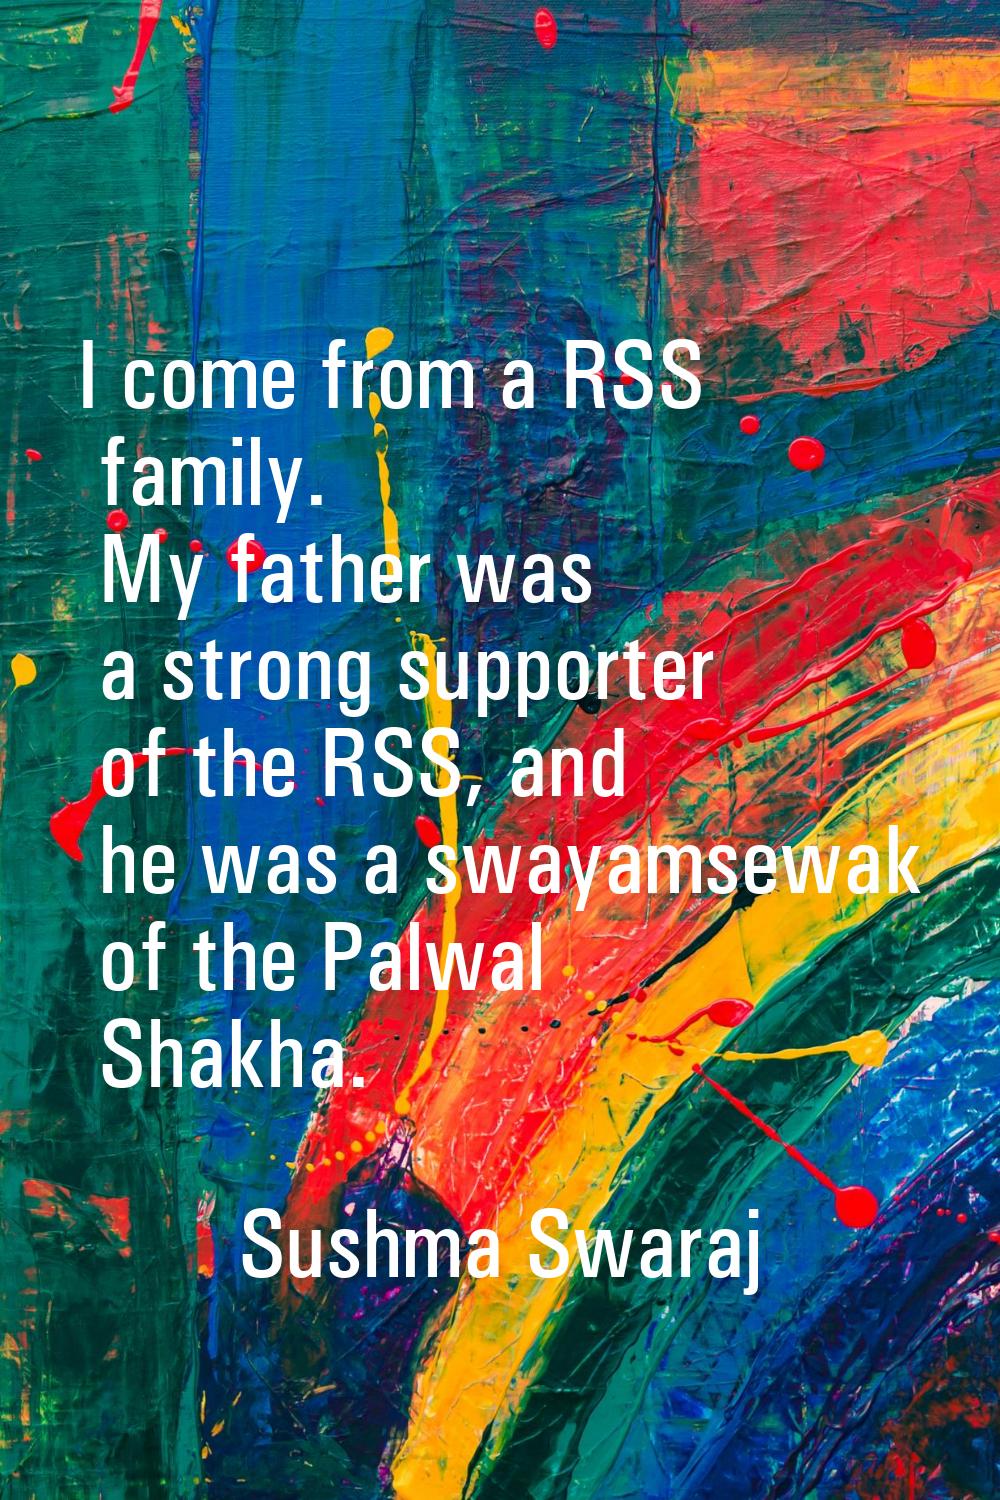 I come from a RSS family. My father was a strong supporter of the RSS, and he was a swayamsewak of 